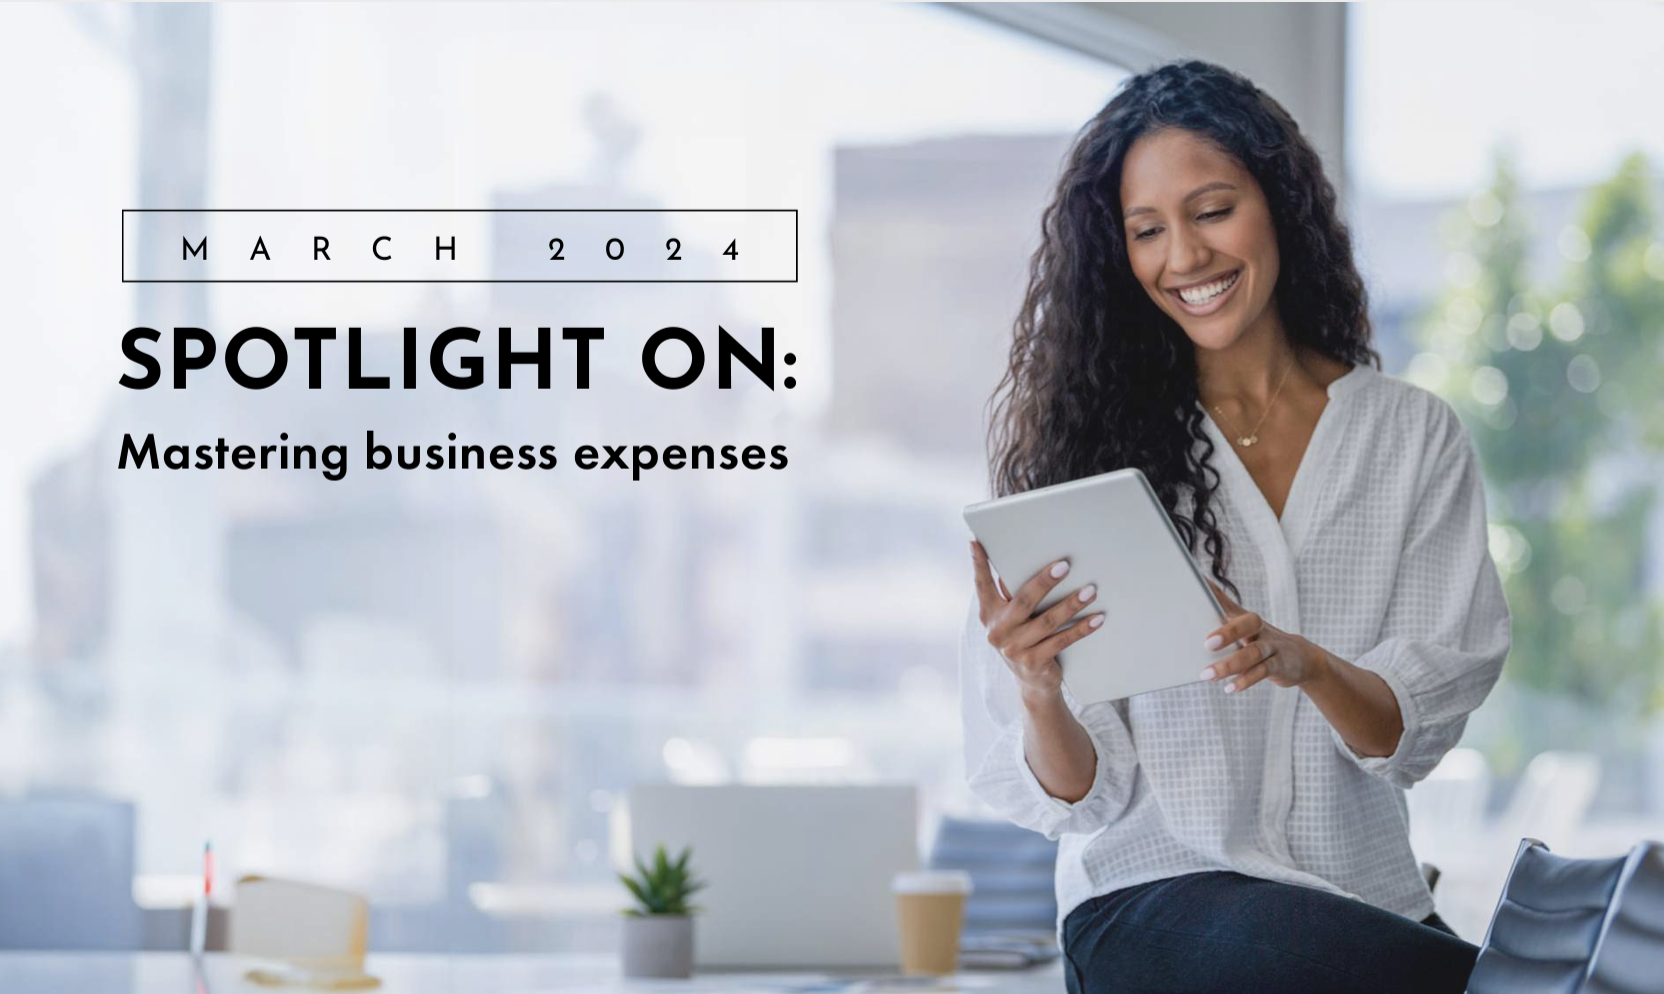 spotlight on mastering business expenses march 2024 lady looking at ipad happy